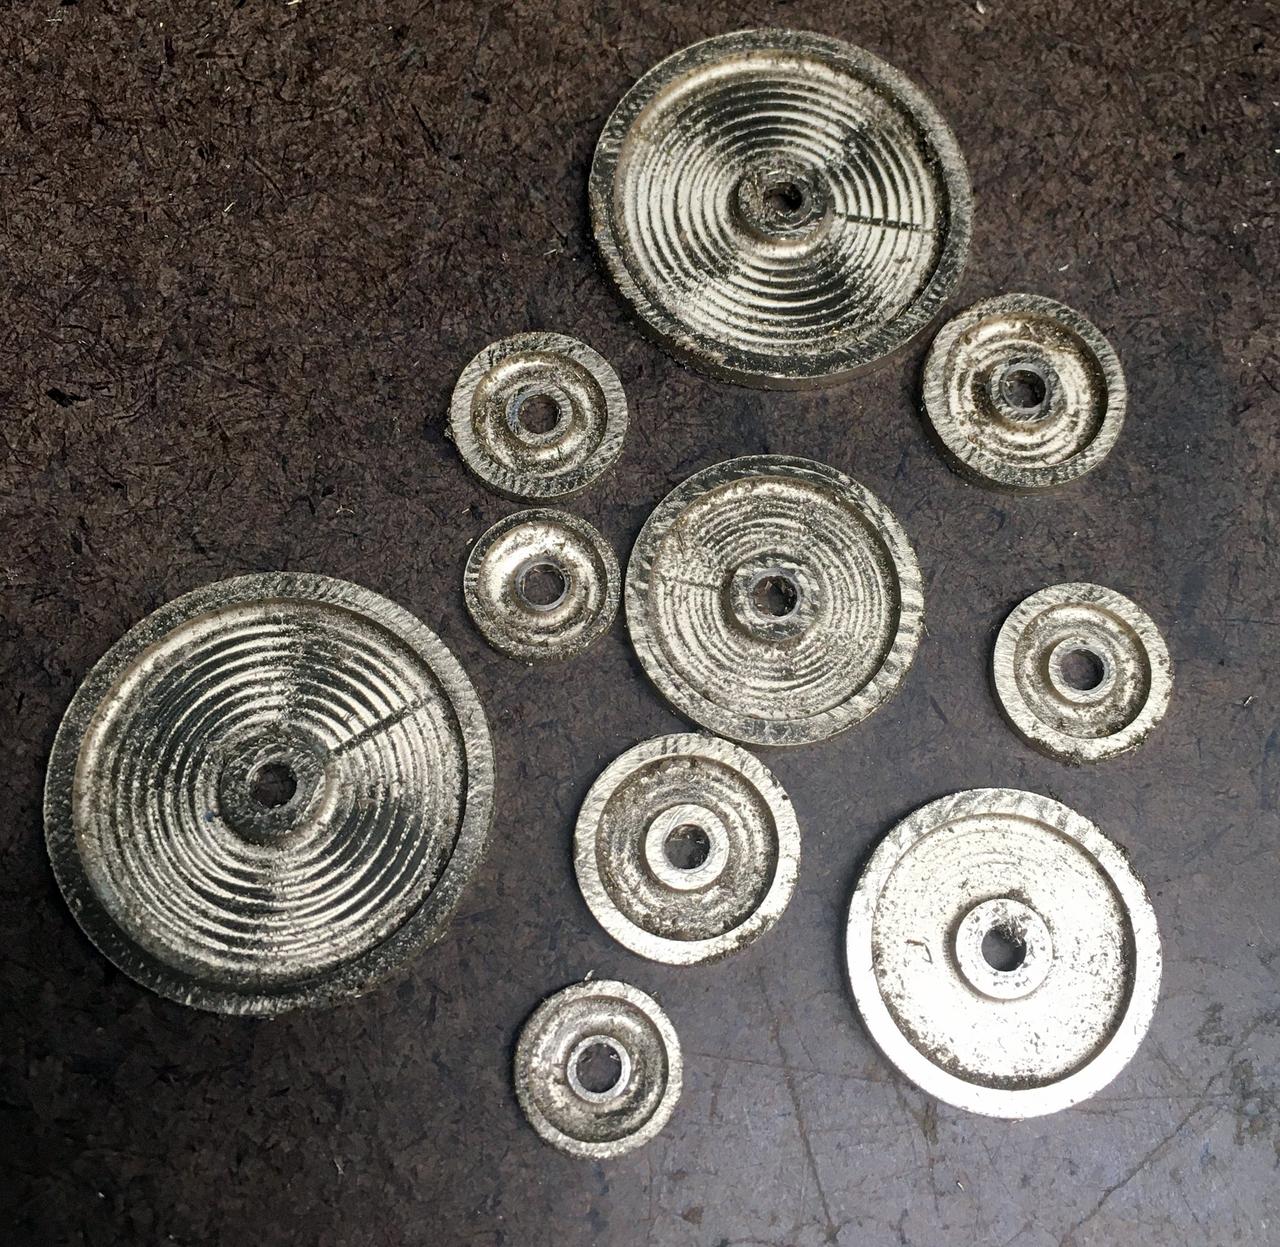 Milling weights completed